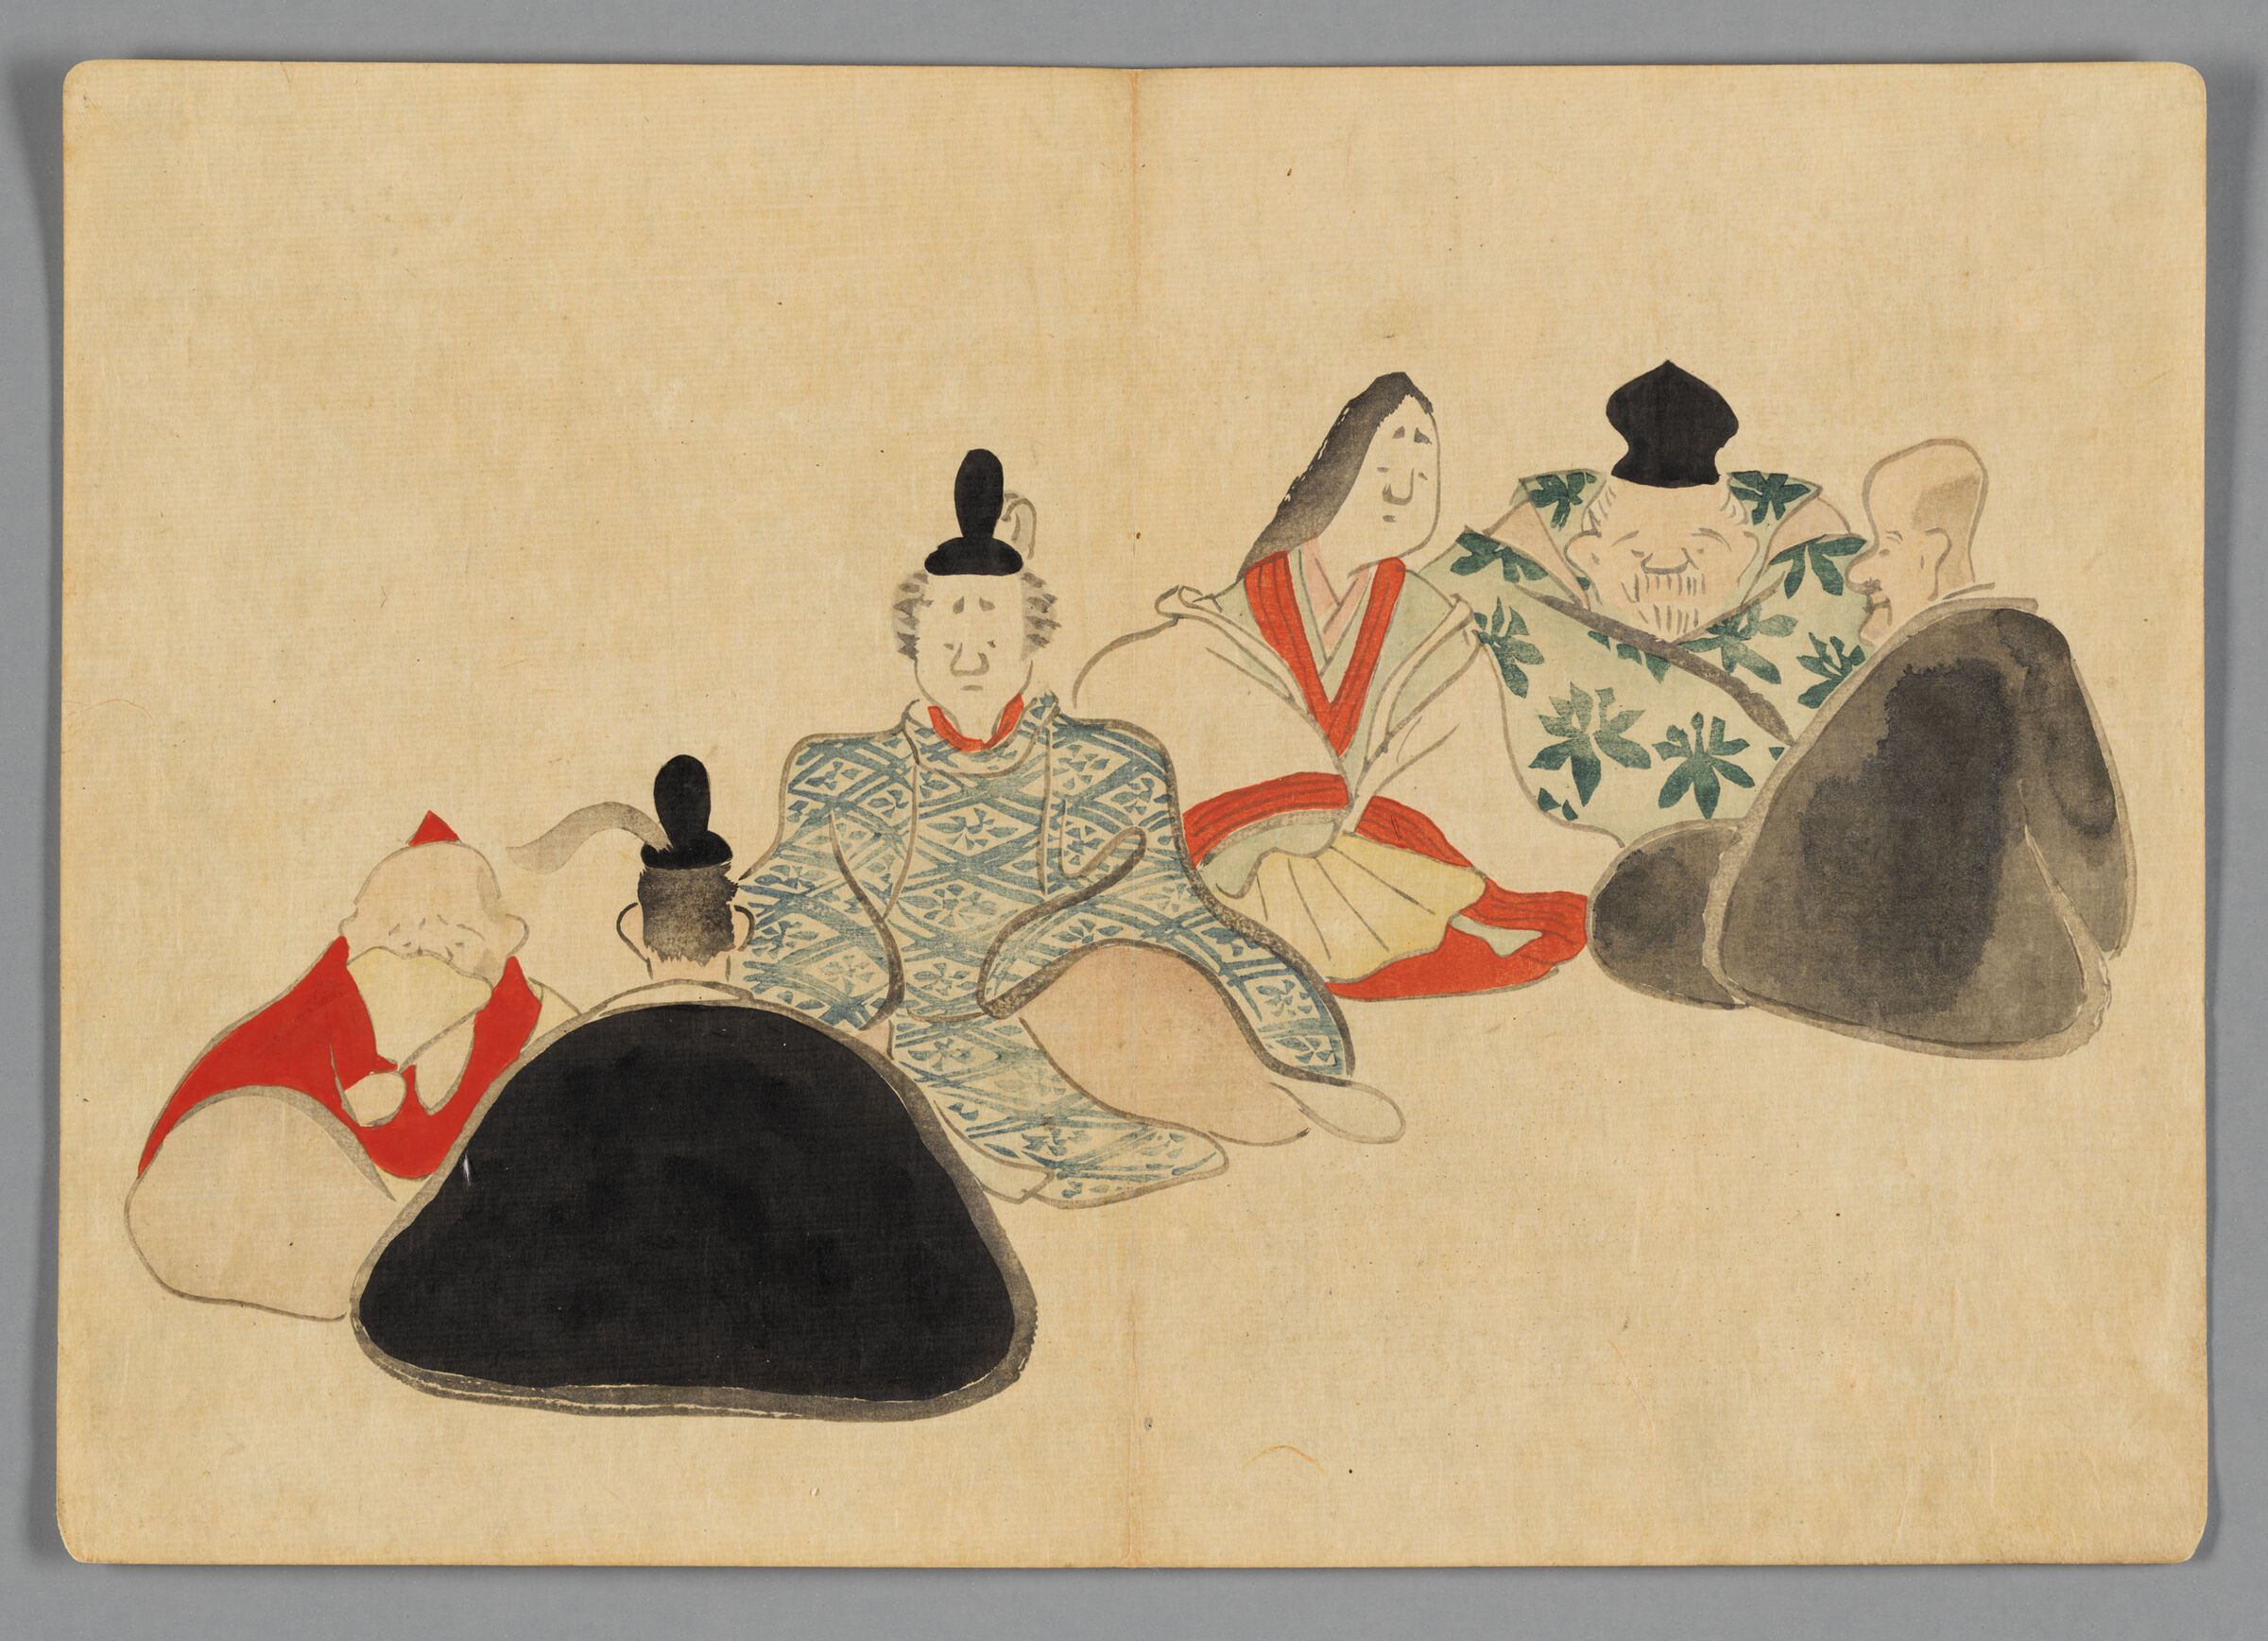 Six Immortal Poets, From The Kōrin Gafu (Kōrin Picture Album)